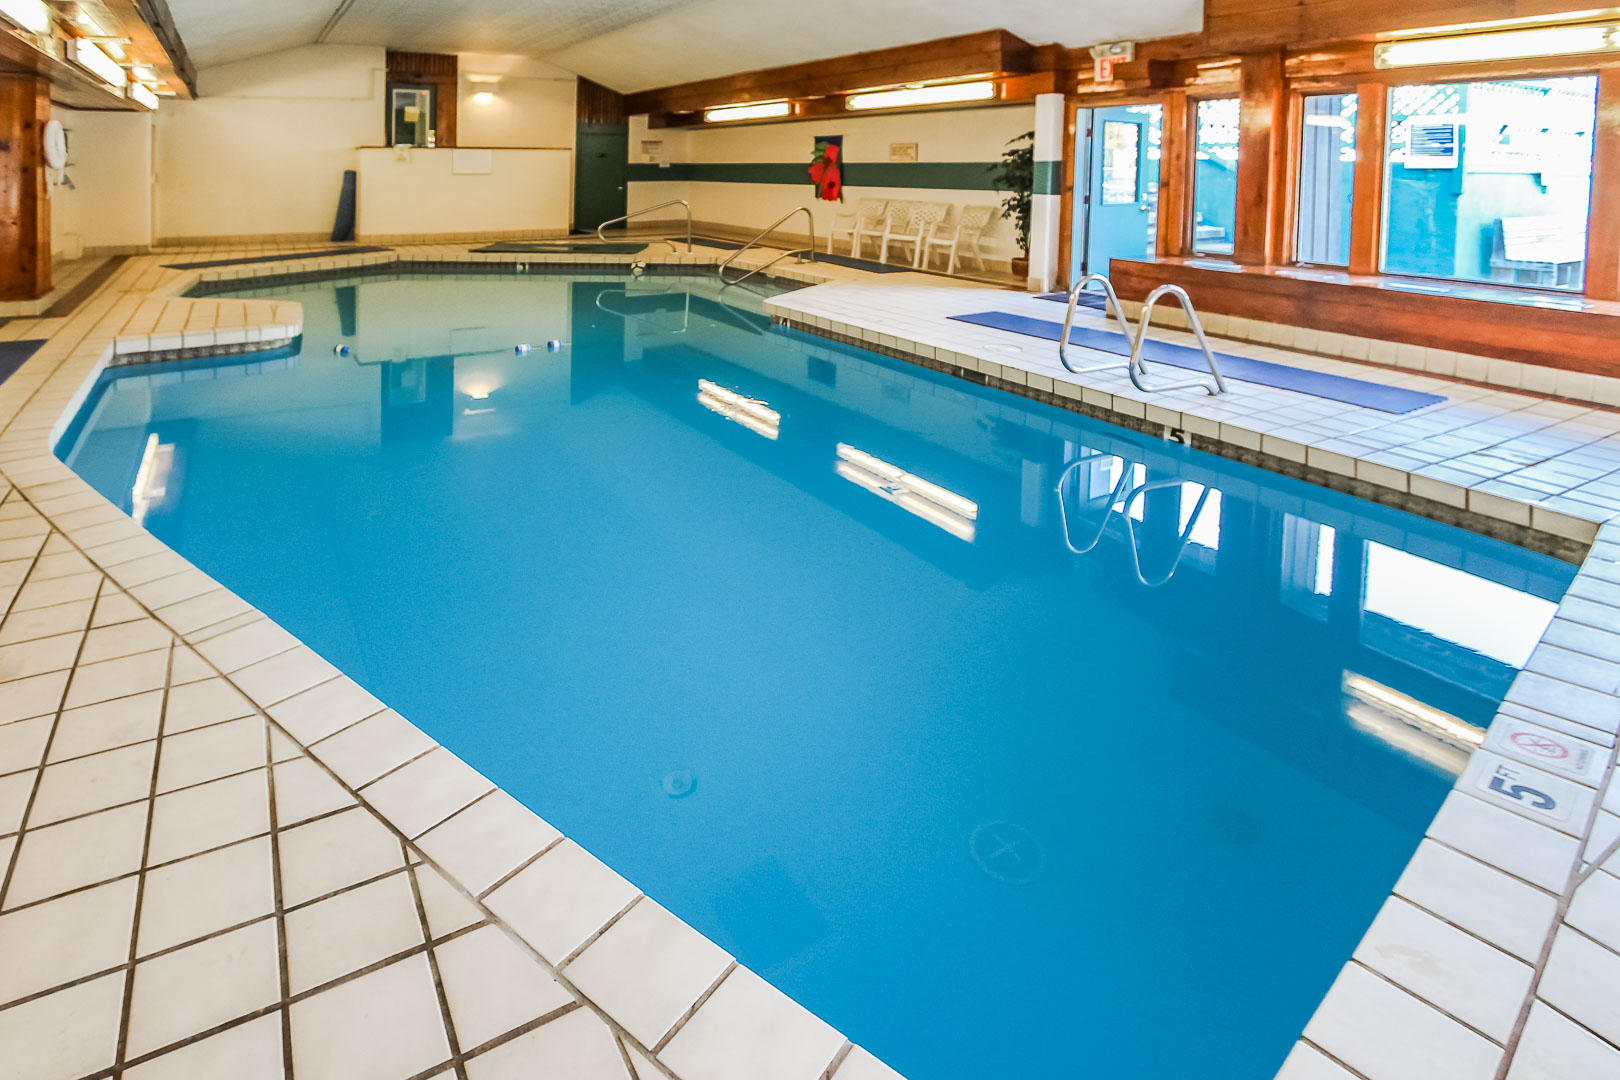 A spacious indoor swimming pool at VRI's Village of Loon Mountain in New Hampshire.